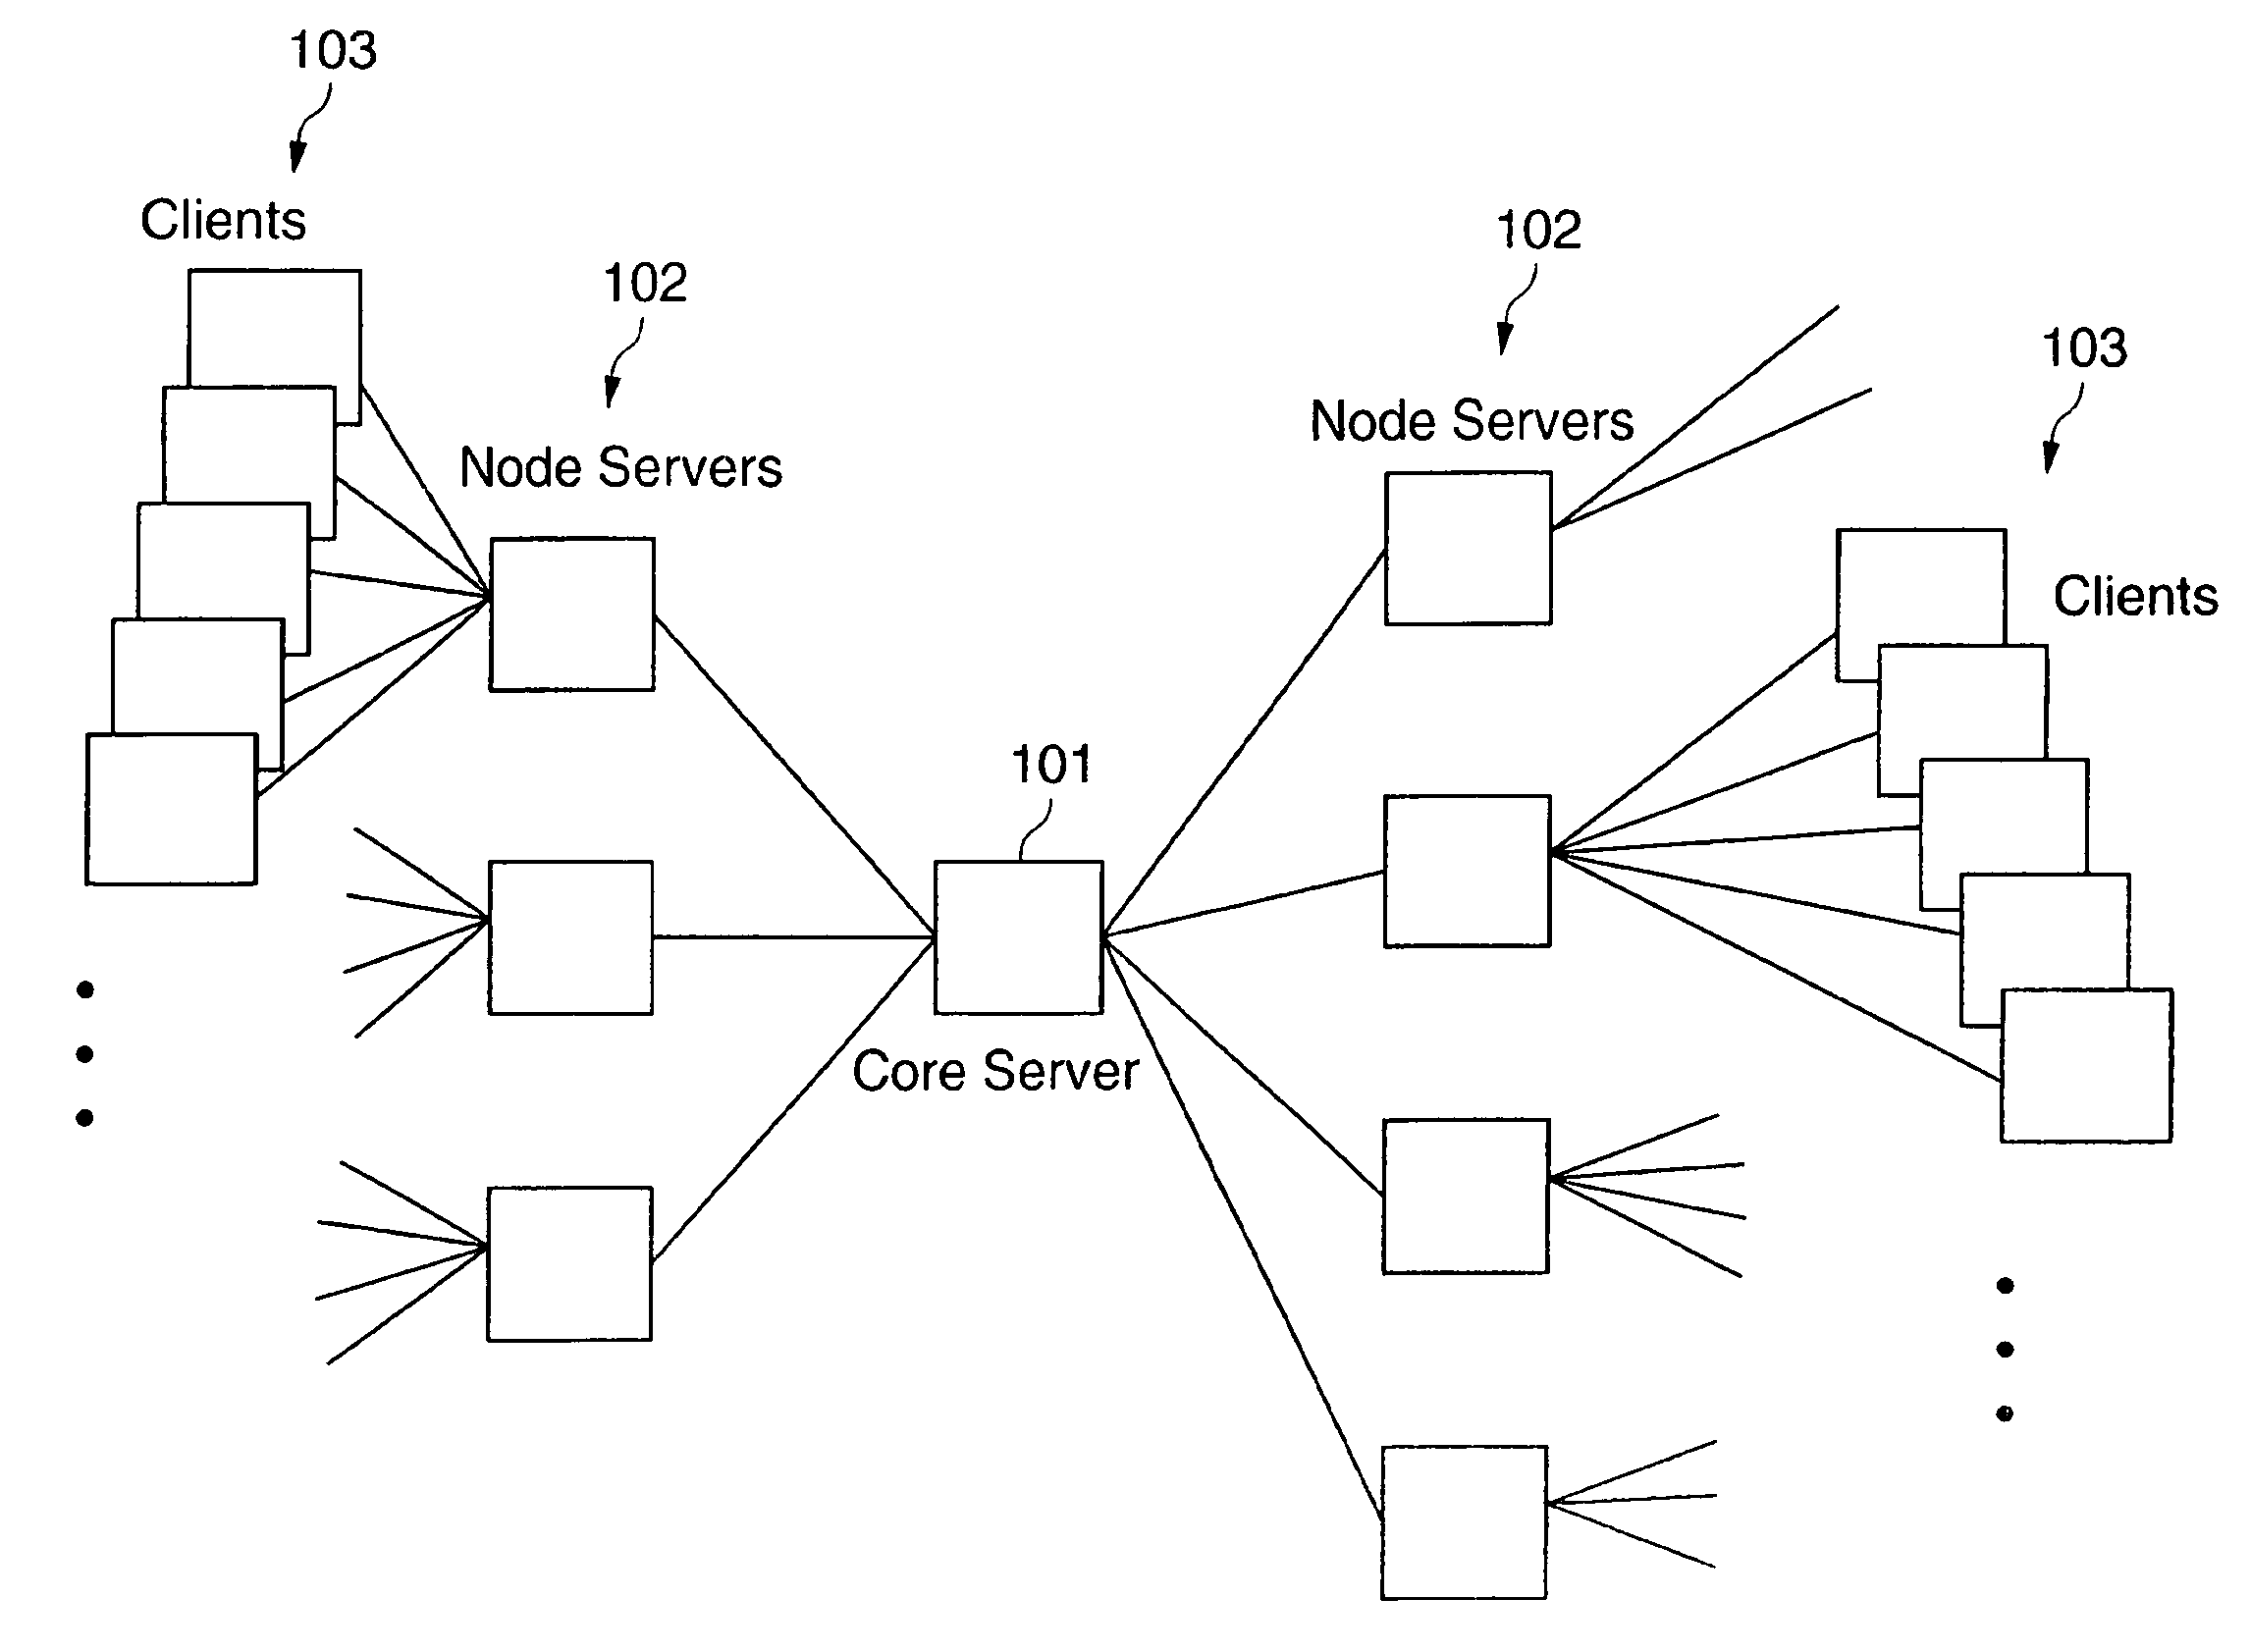 Content distribution system for distributing content over a network, with particular applicability to distributing high-bandwidth content